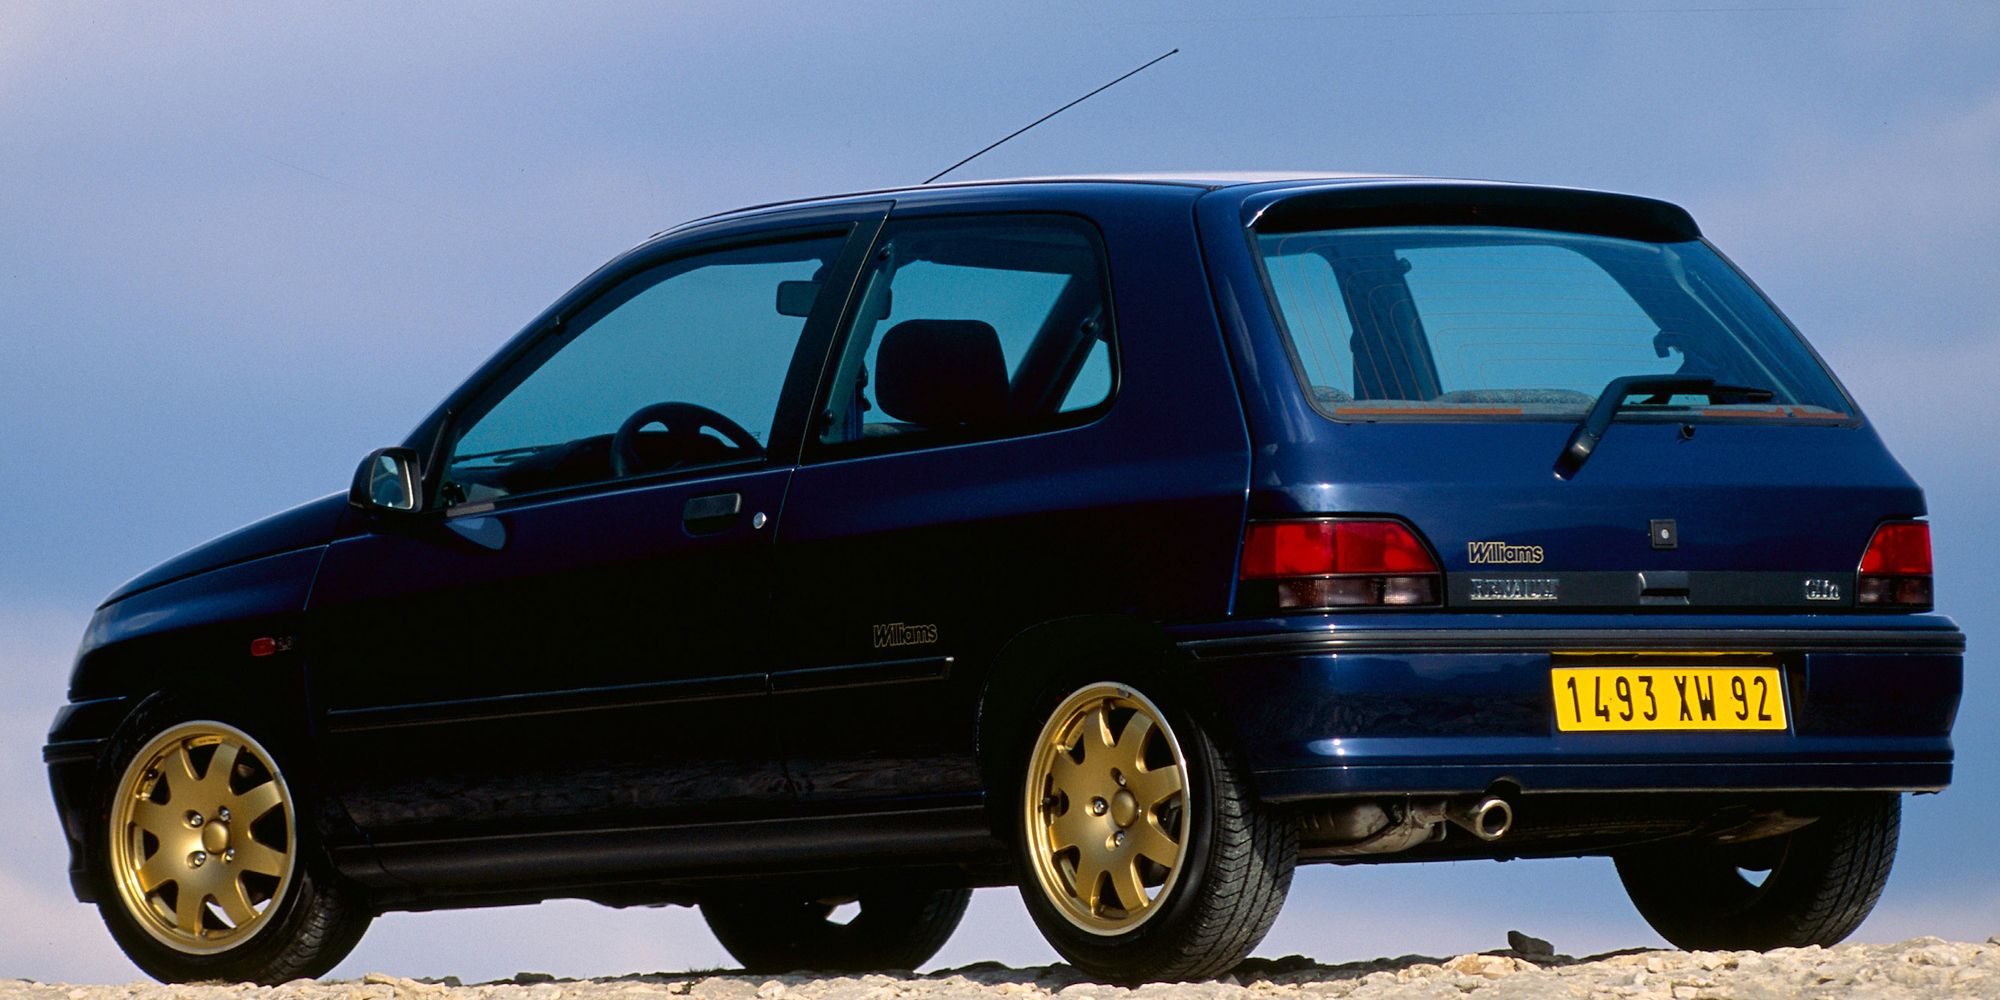 Rear 3/4 view of the Clio Williams